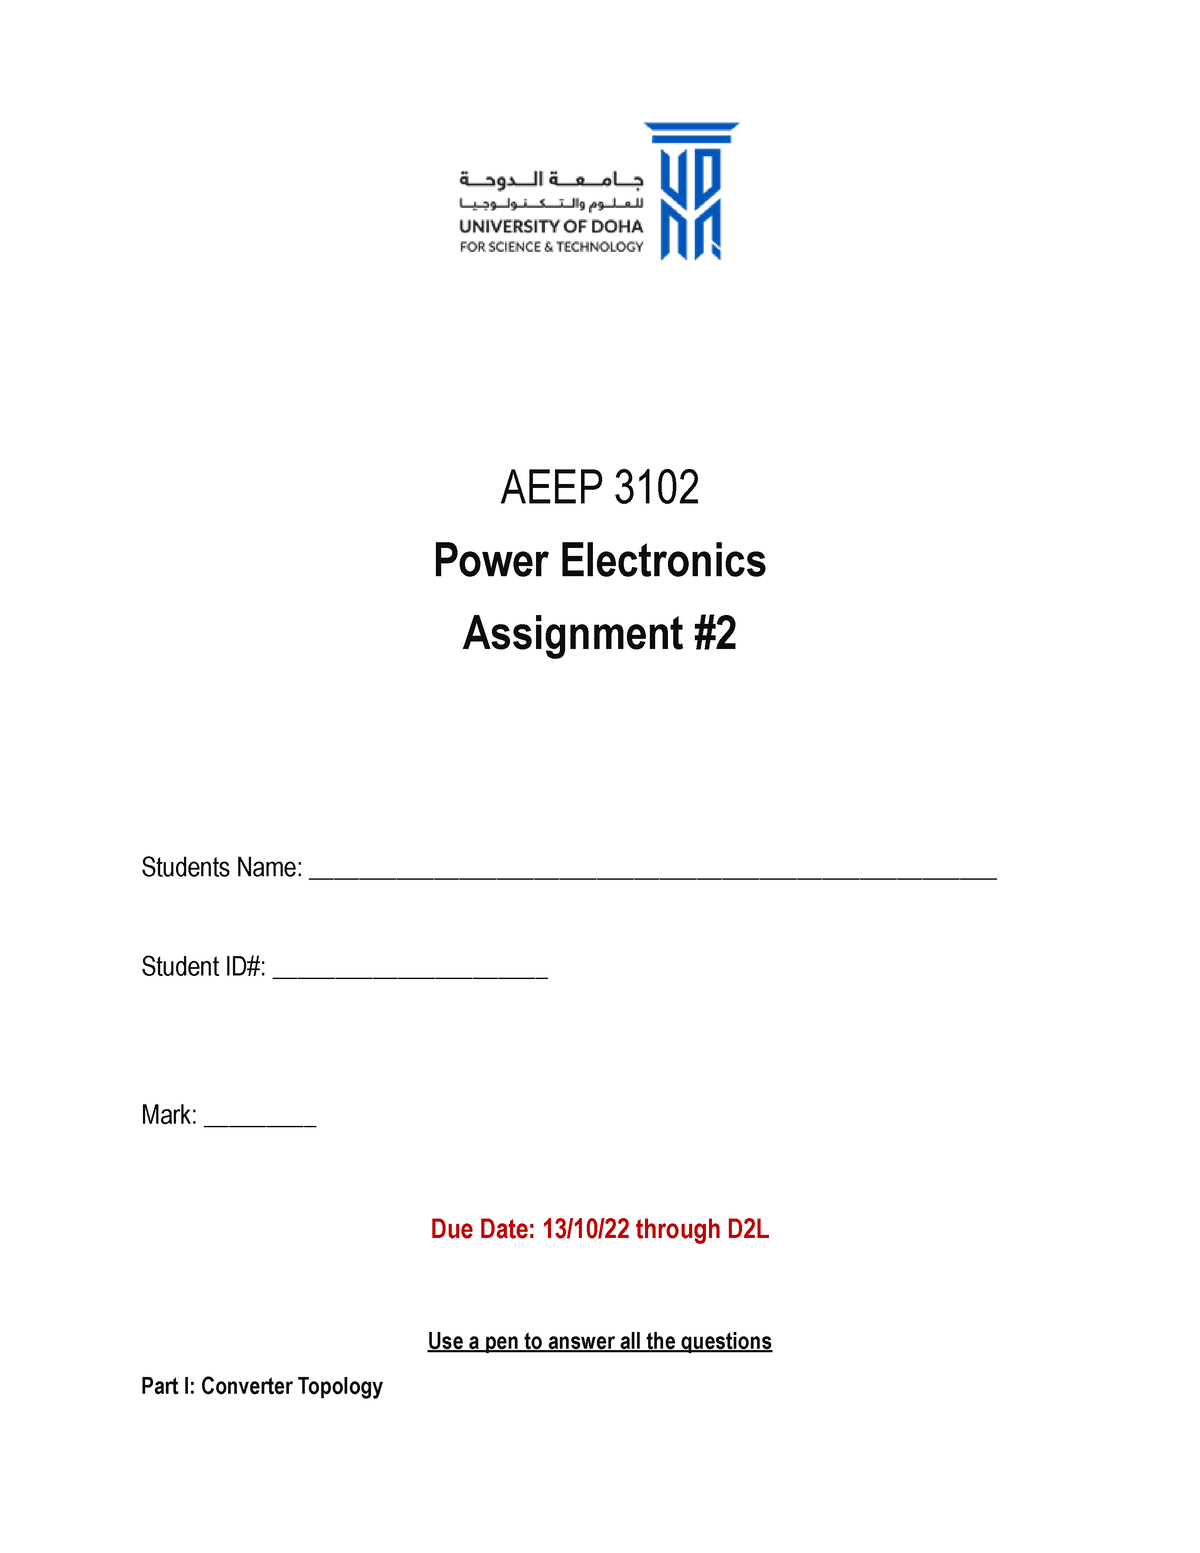 power electronics assignment questions